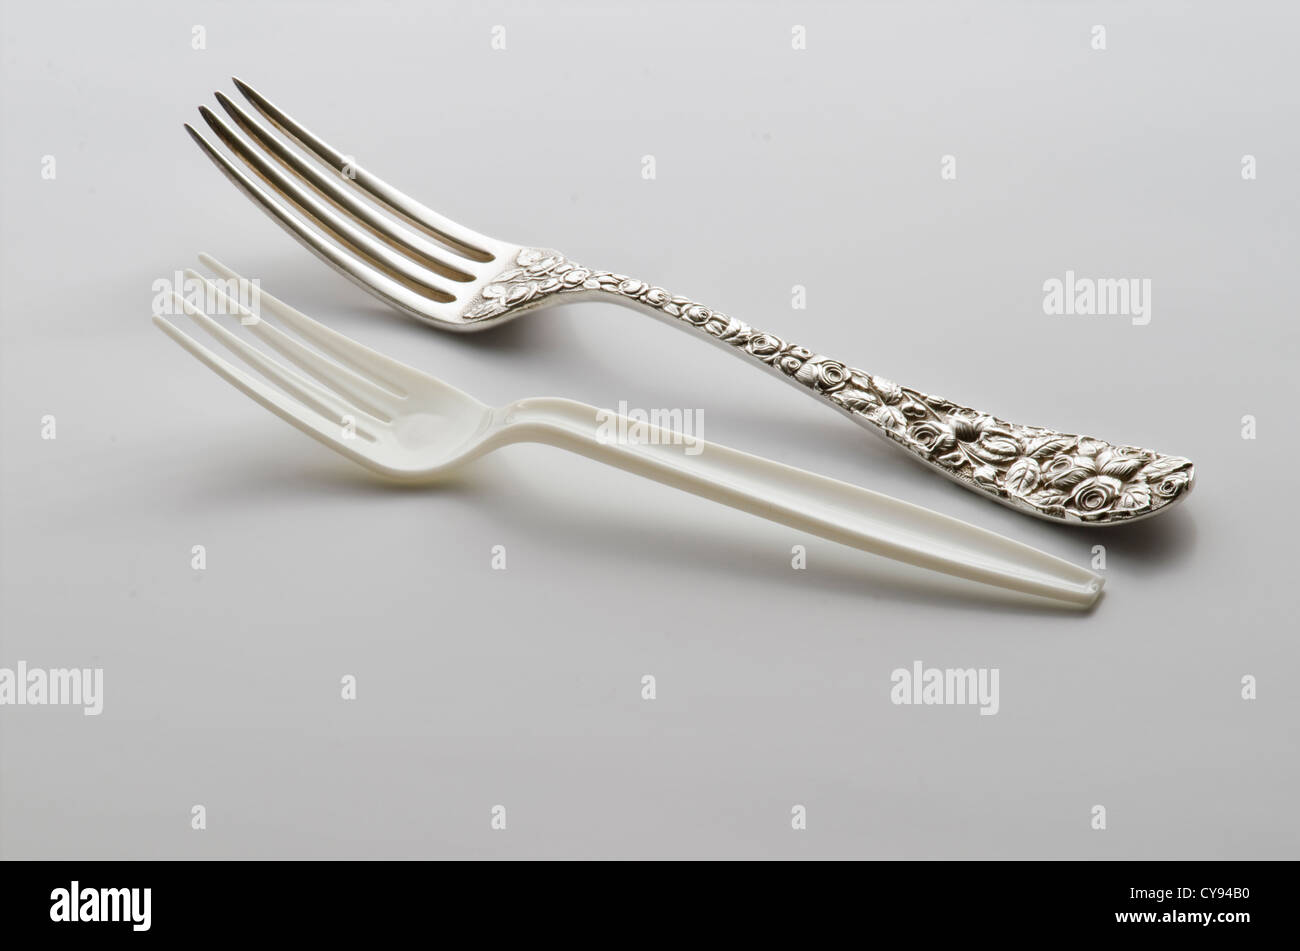 antique sterling dinner fork with cheap plastic fork Stock Photo